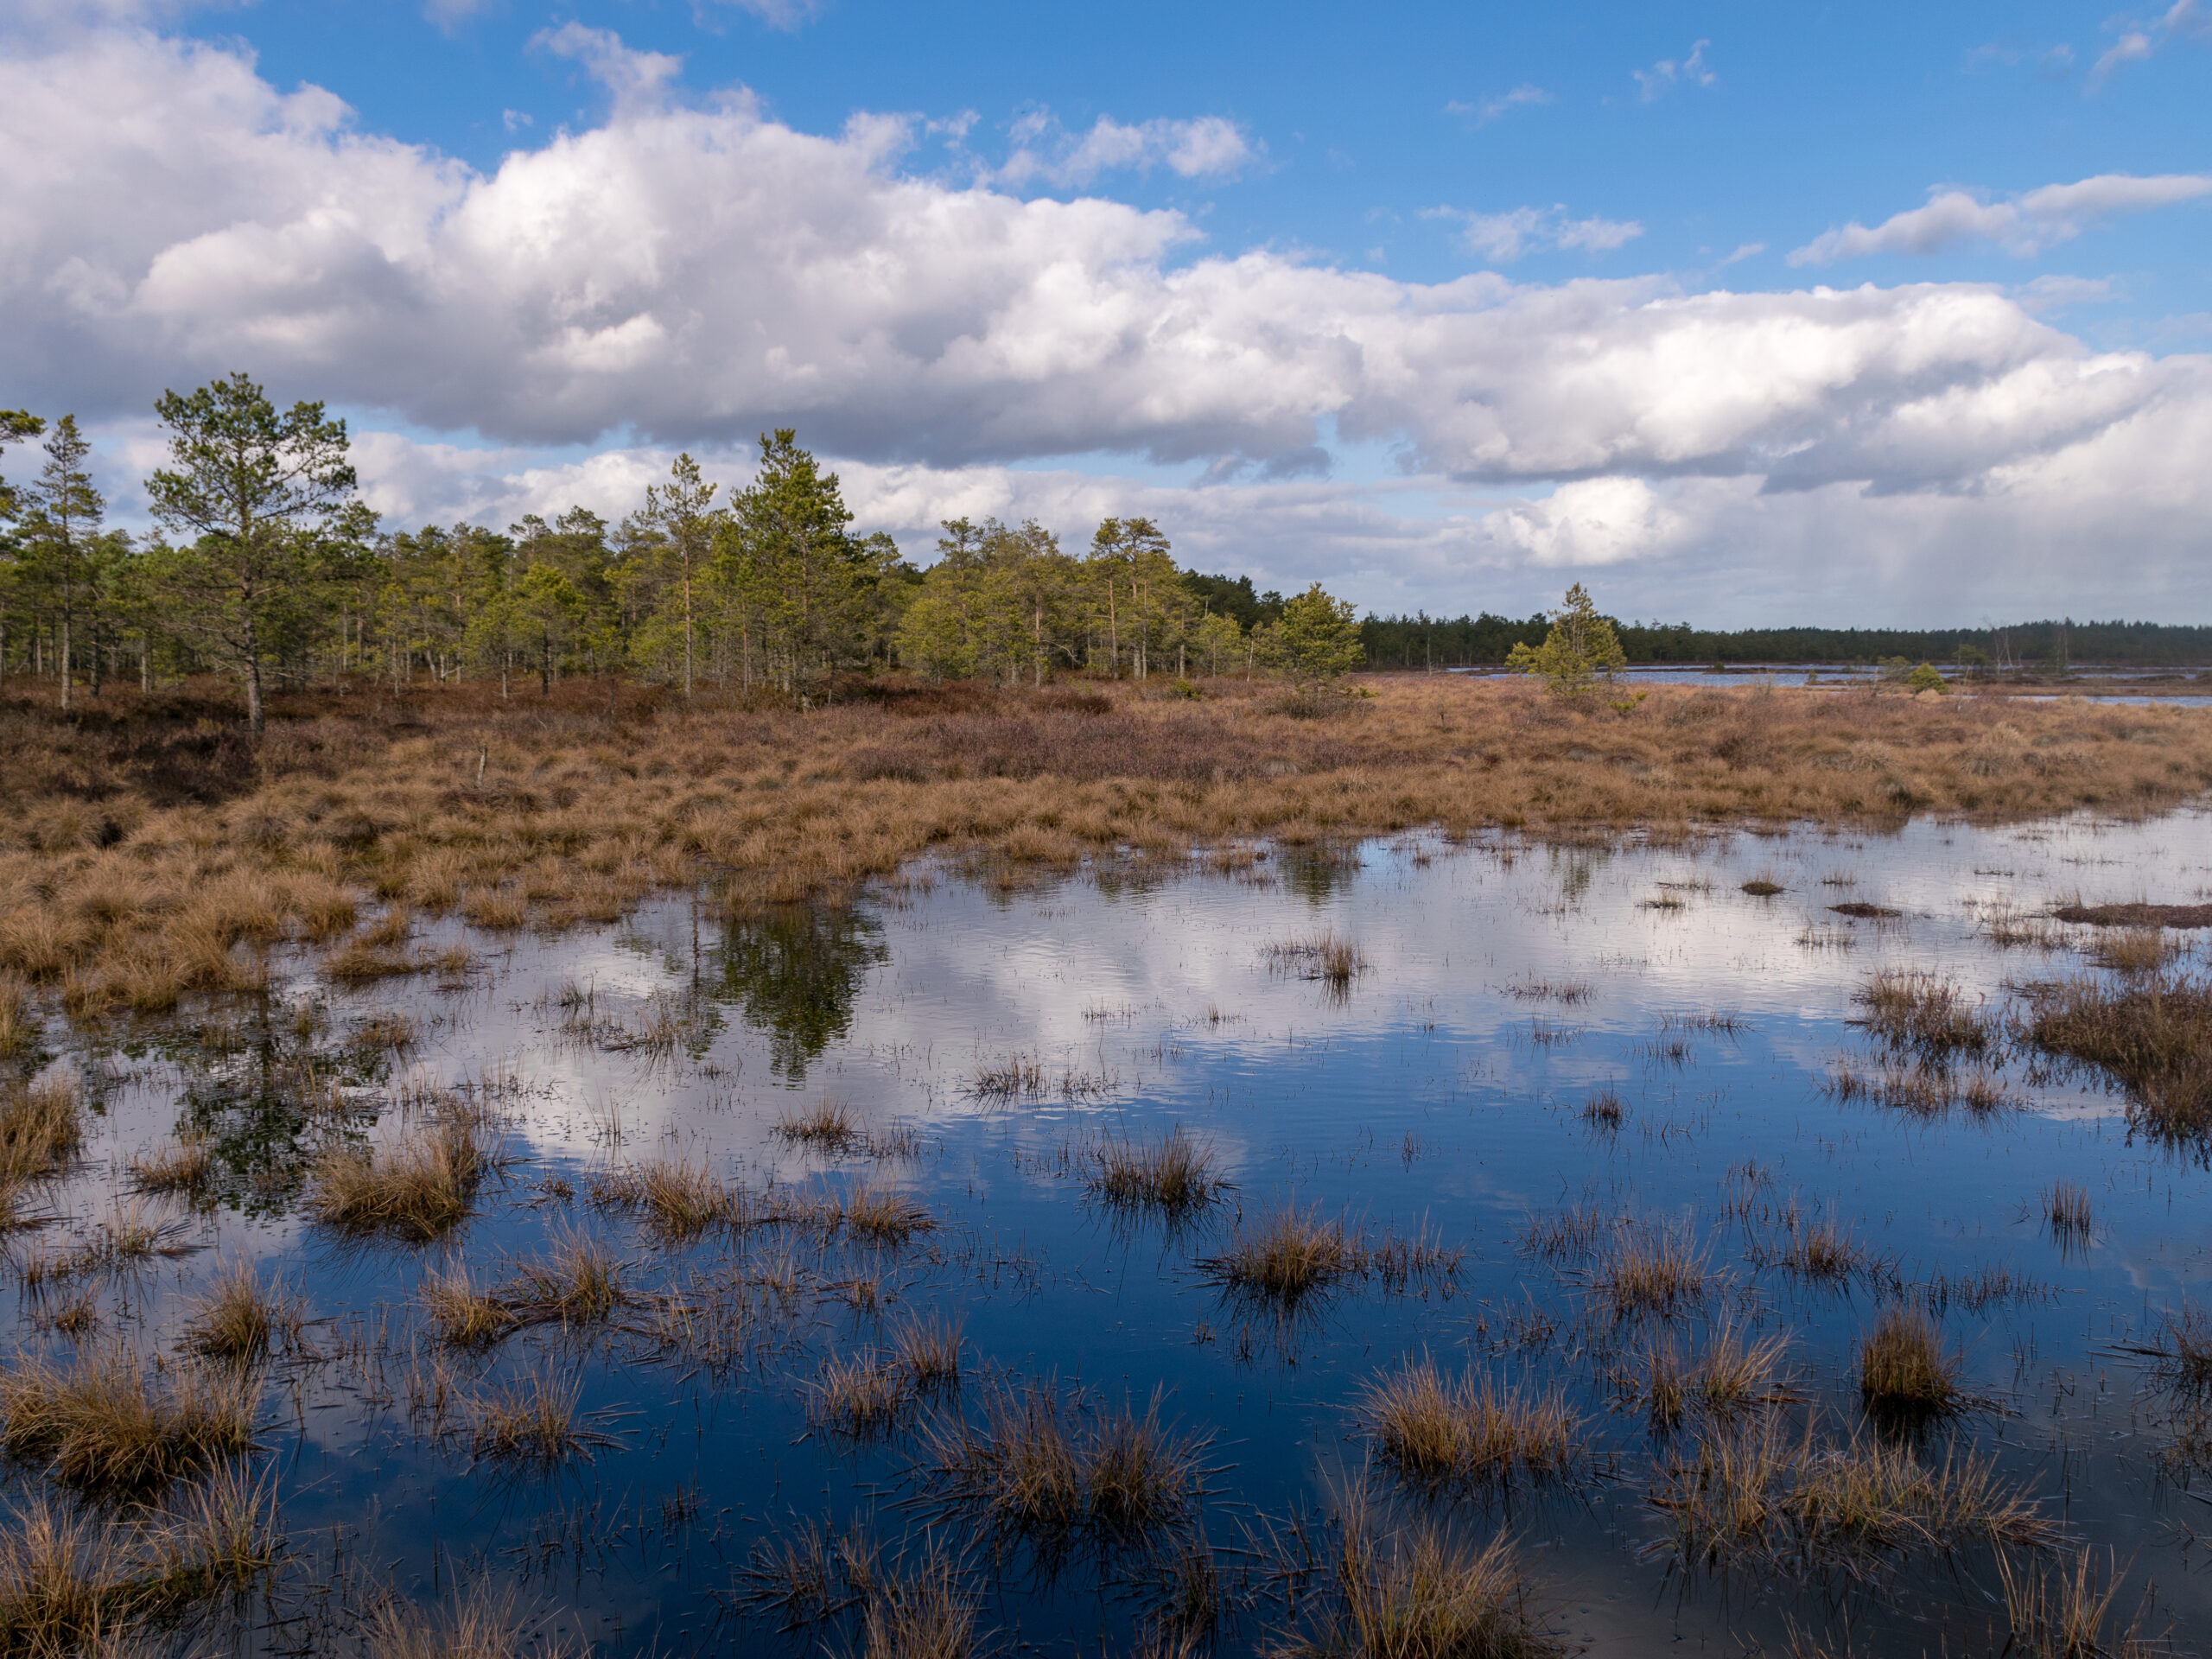 View of a peat bog lake on a sunny day with fragments of dry grass in the foreground, beautiful reflections of the sky and clouds in the water,